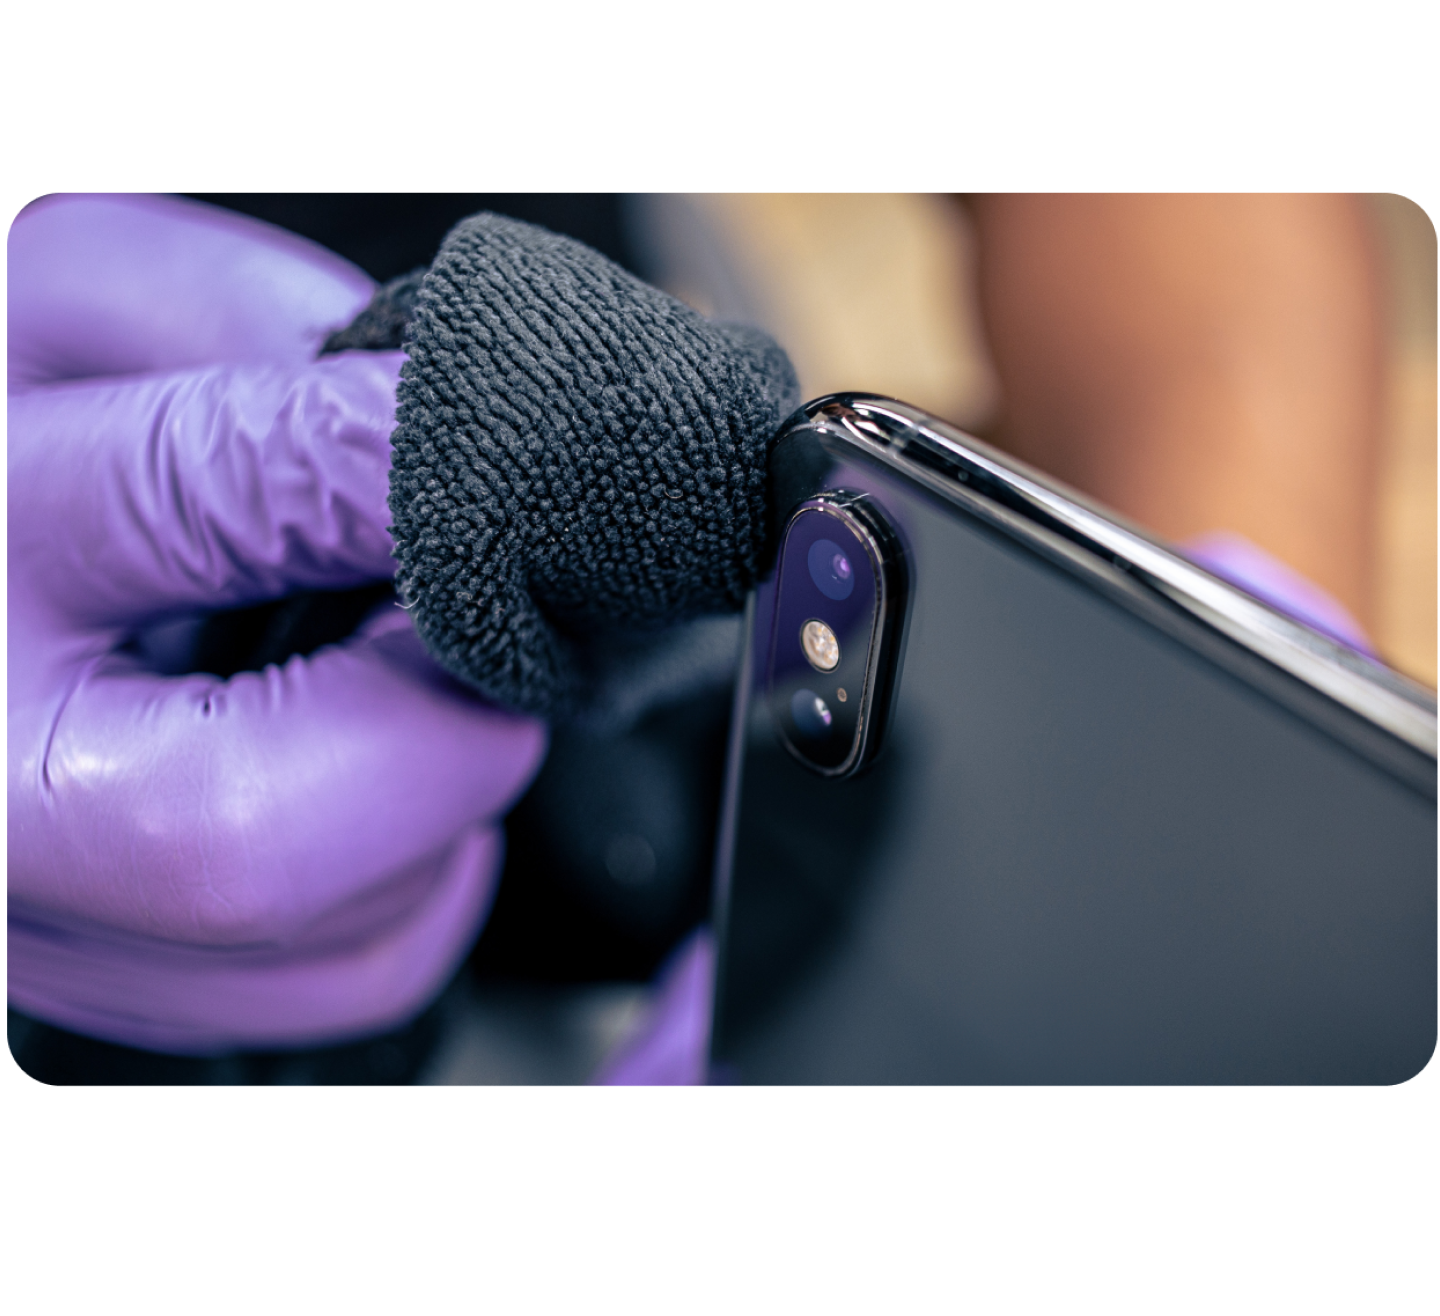 Gloved hand cleaning a smartphone